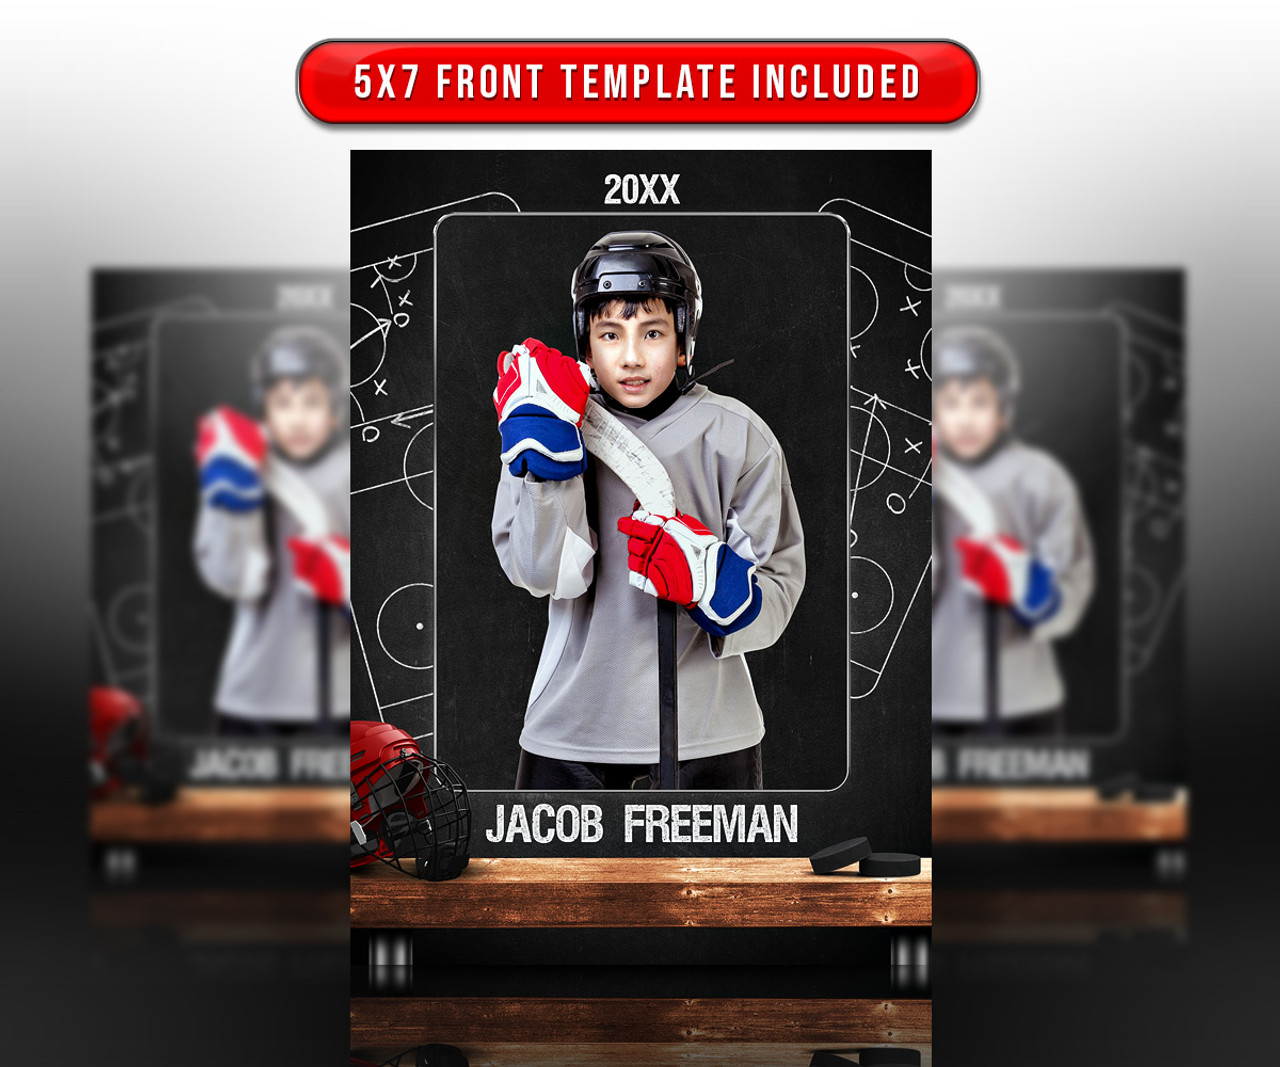 SPORTS TRADING CARDS AND 5X7 TEMPLATE - HOCKEY CHALK